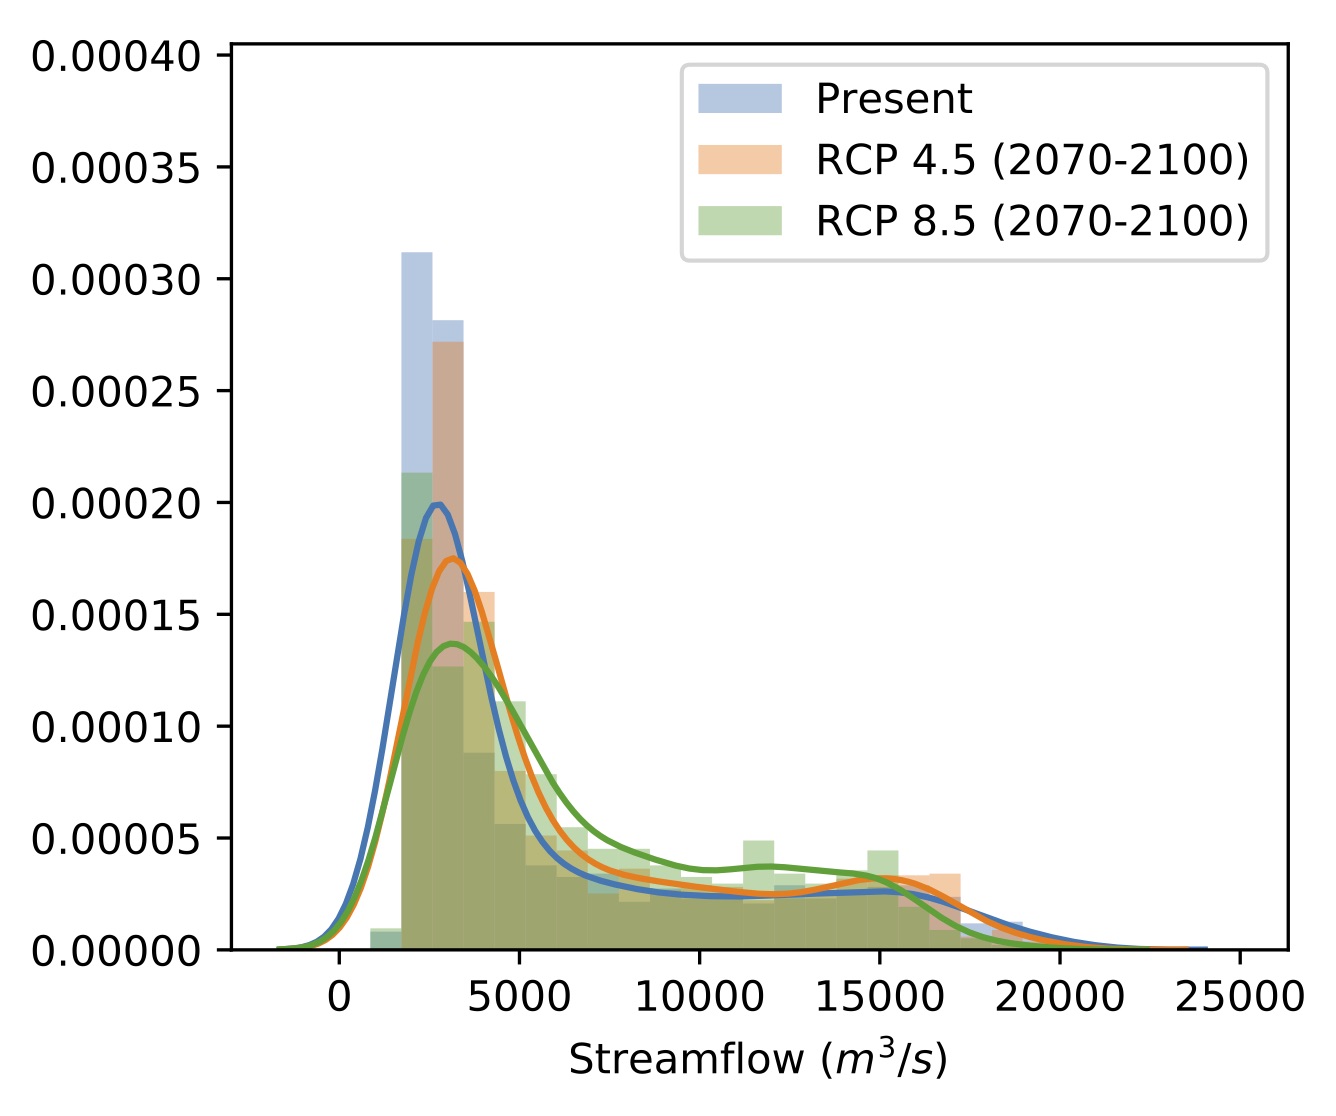 Distribution of streamflows, comparing the present to RCP 4.5 and 8.5 scenarios in the future (2070-2100).